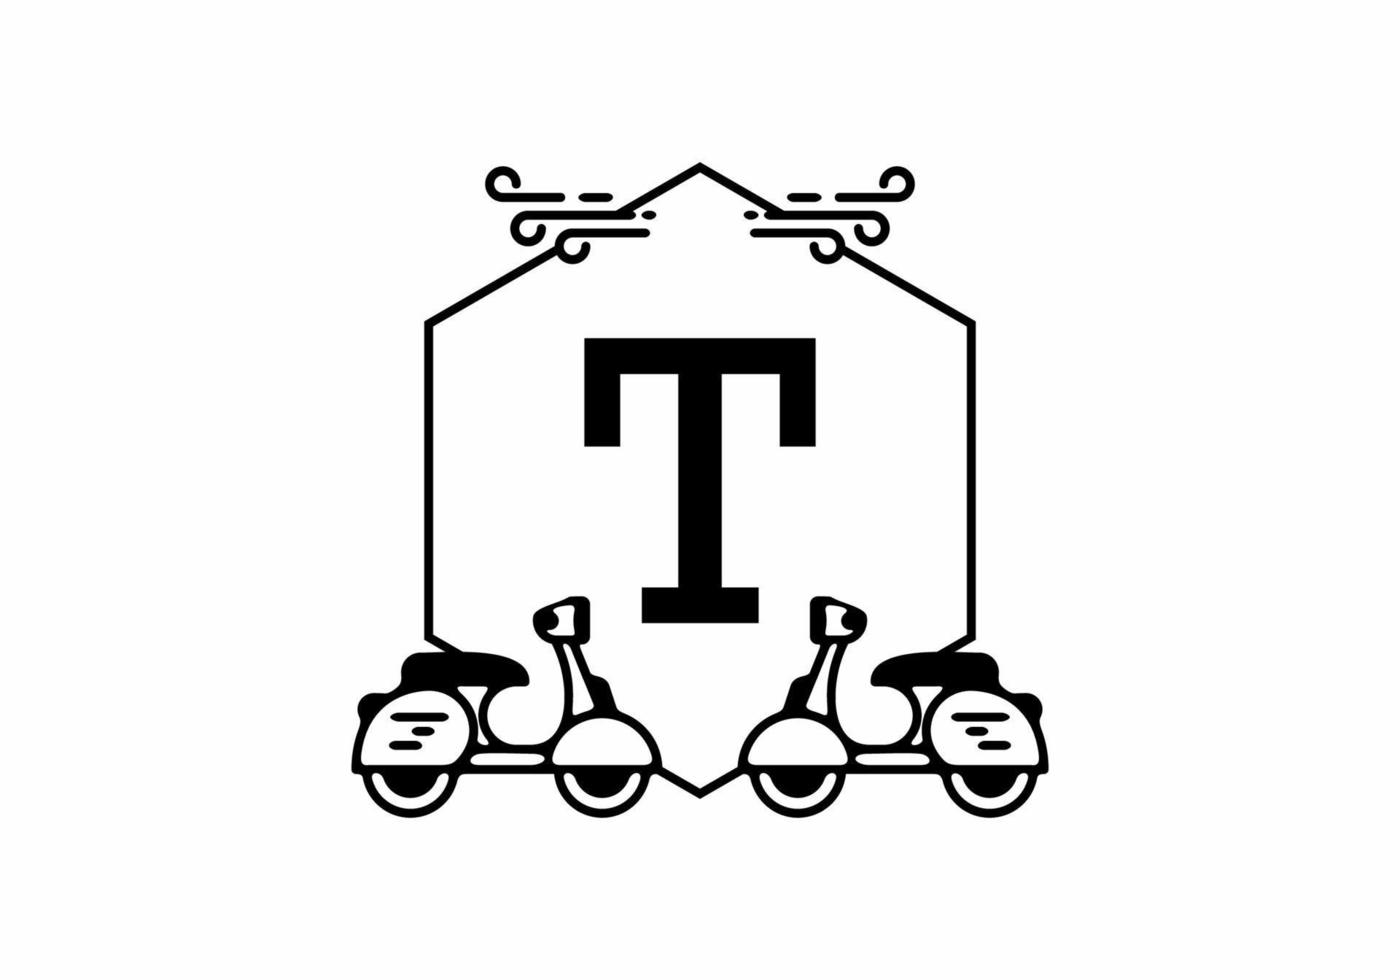 Initial letter T in scooter frame vector